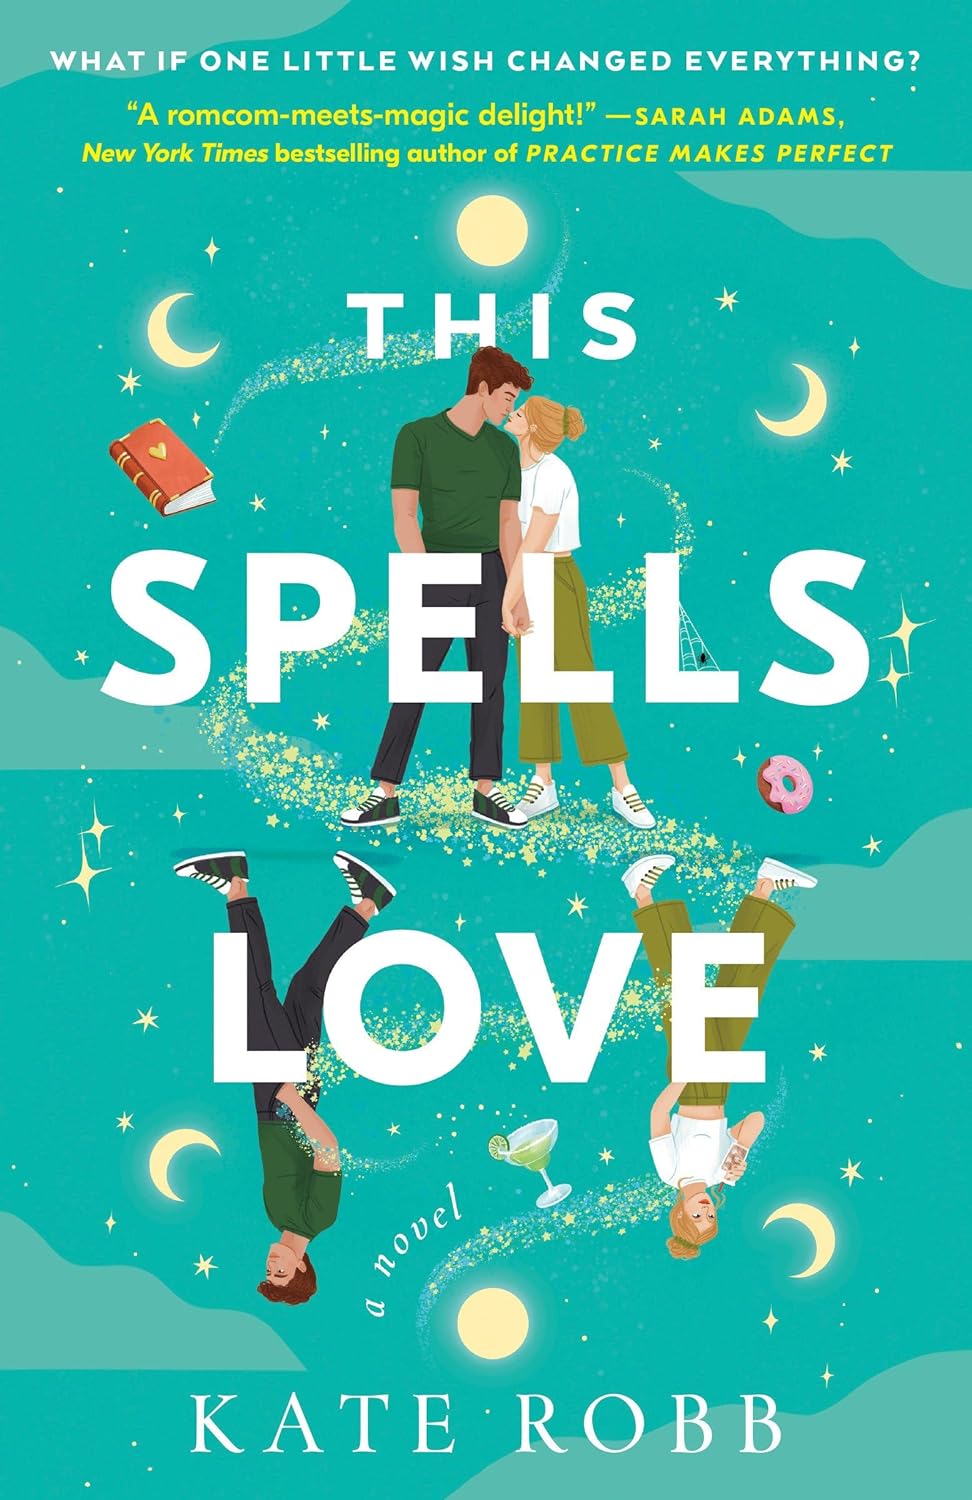 Image for "This Spells Love"